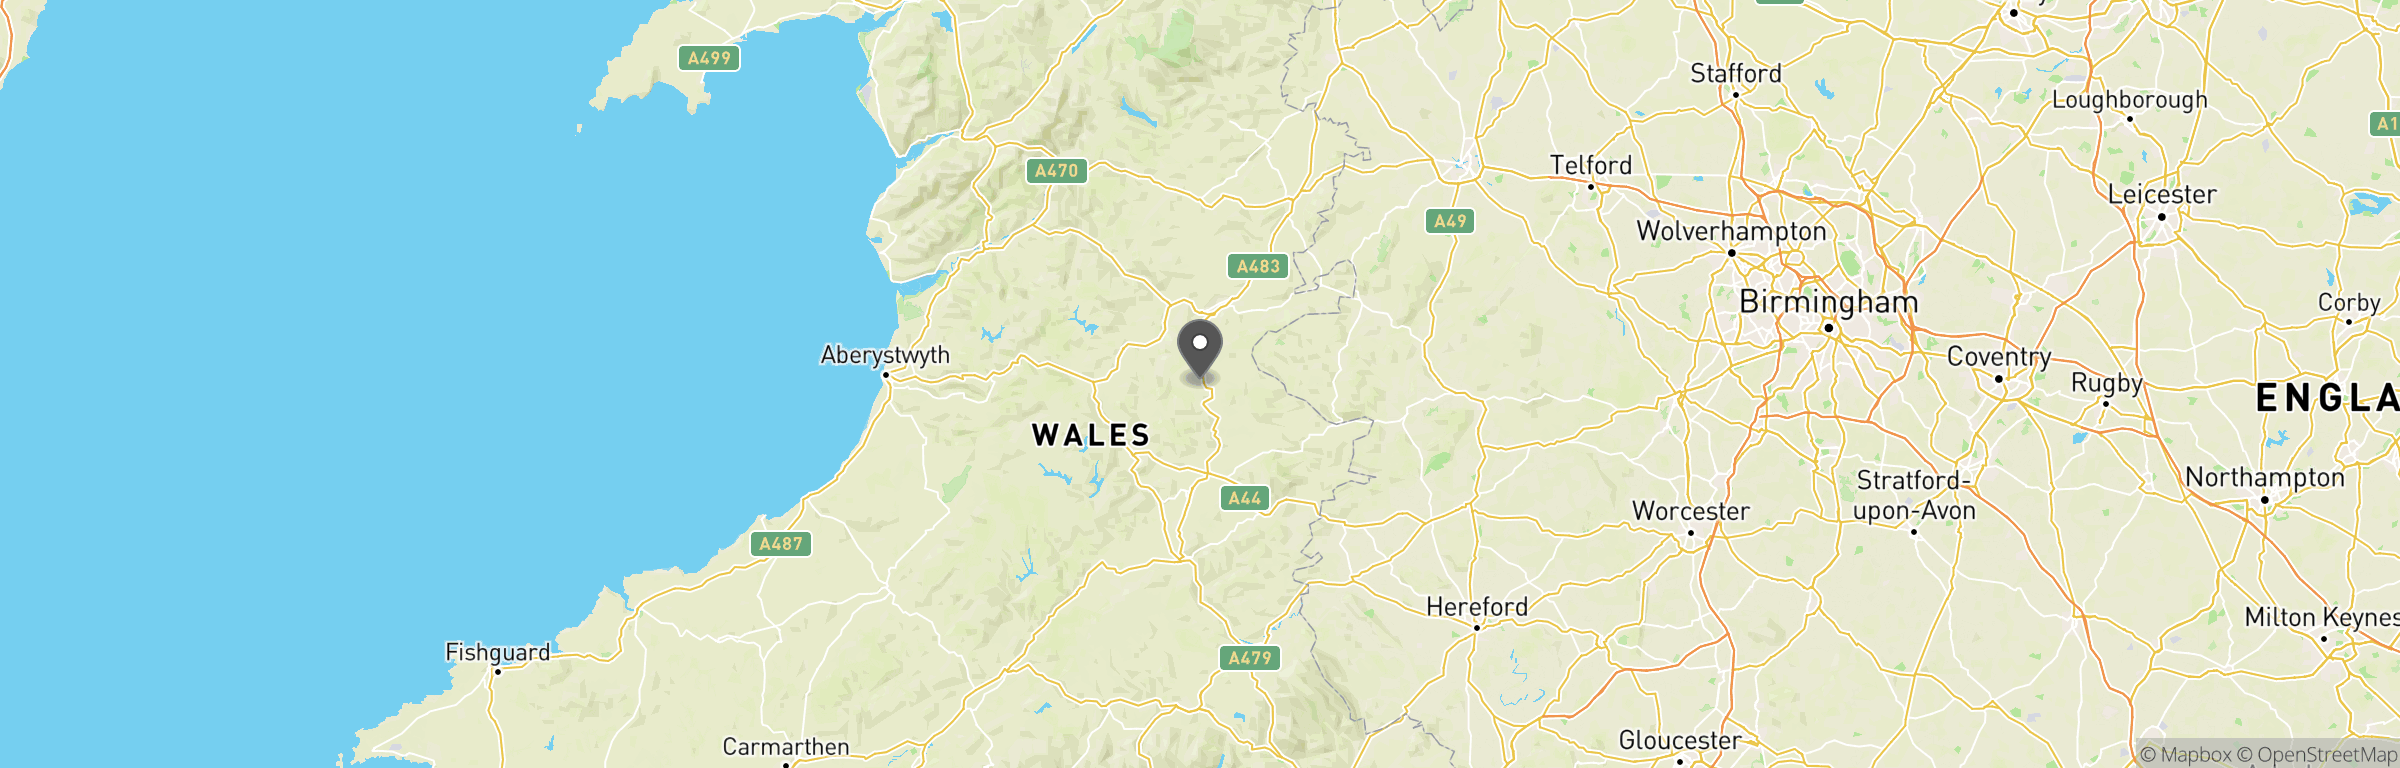 Location map of Midwales Airsoft